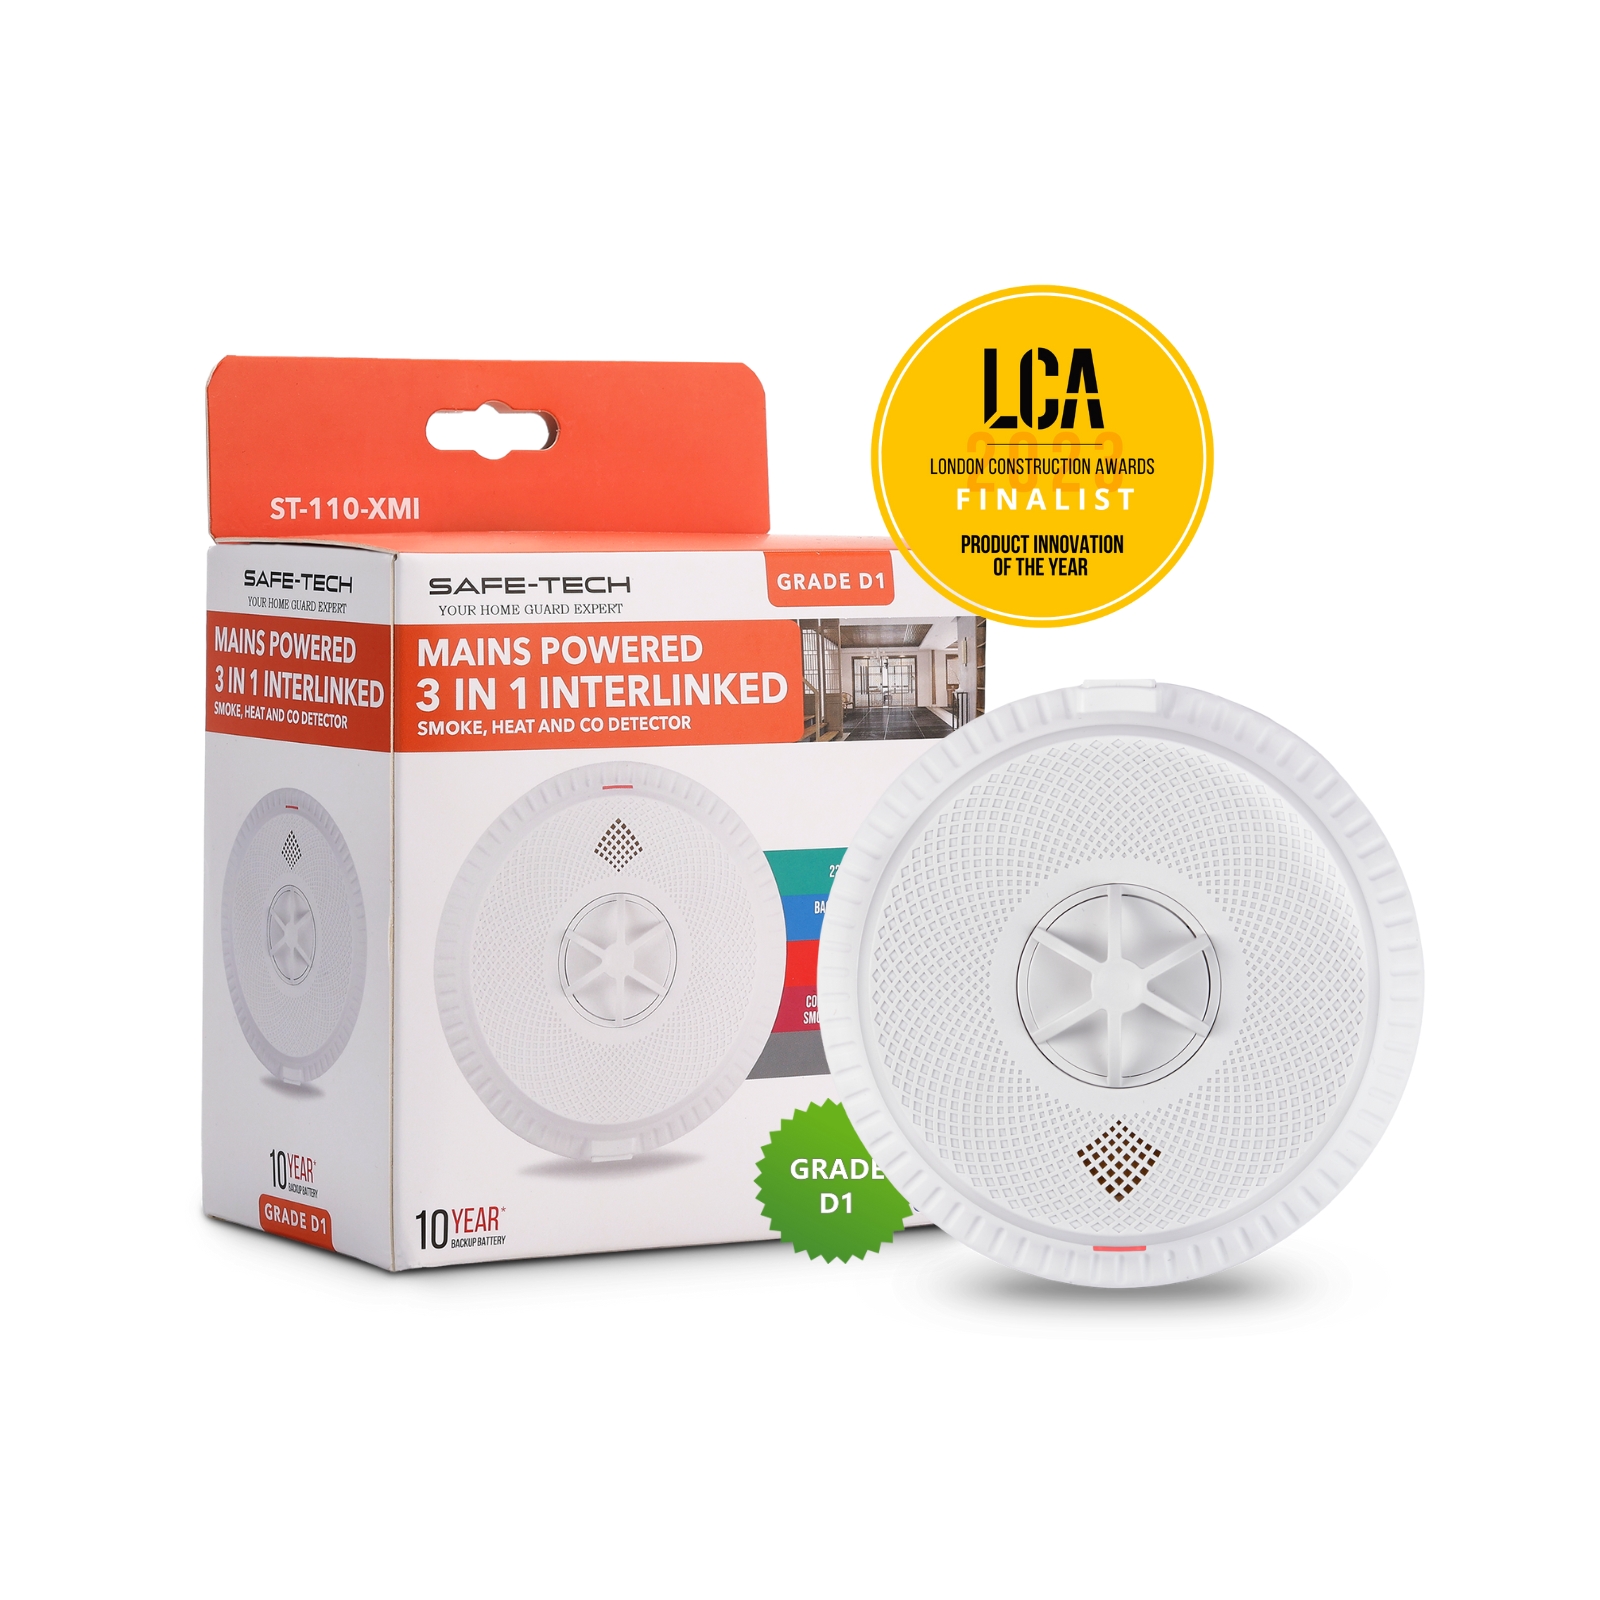 SAFE-TECH Mains Powered Multi Sensor Heat, Smoke and CO Alarm With Built-in RF Module